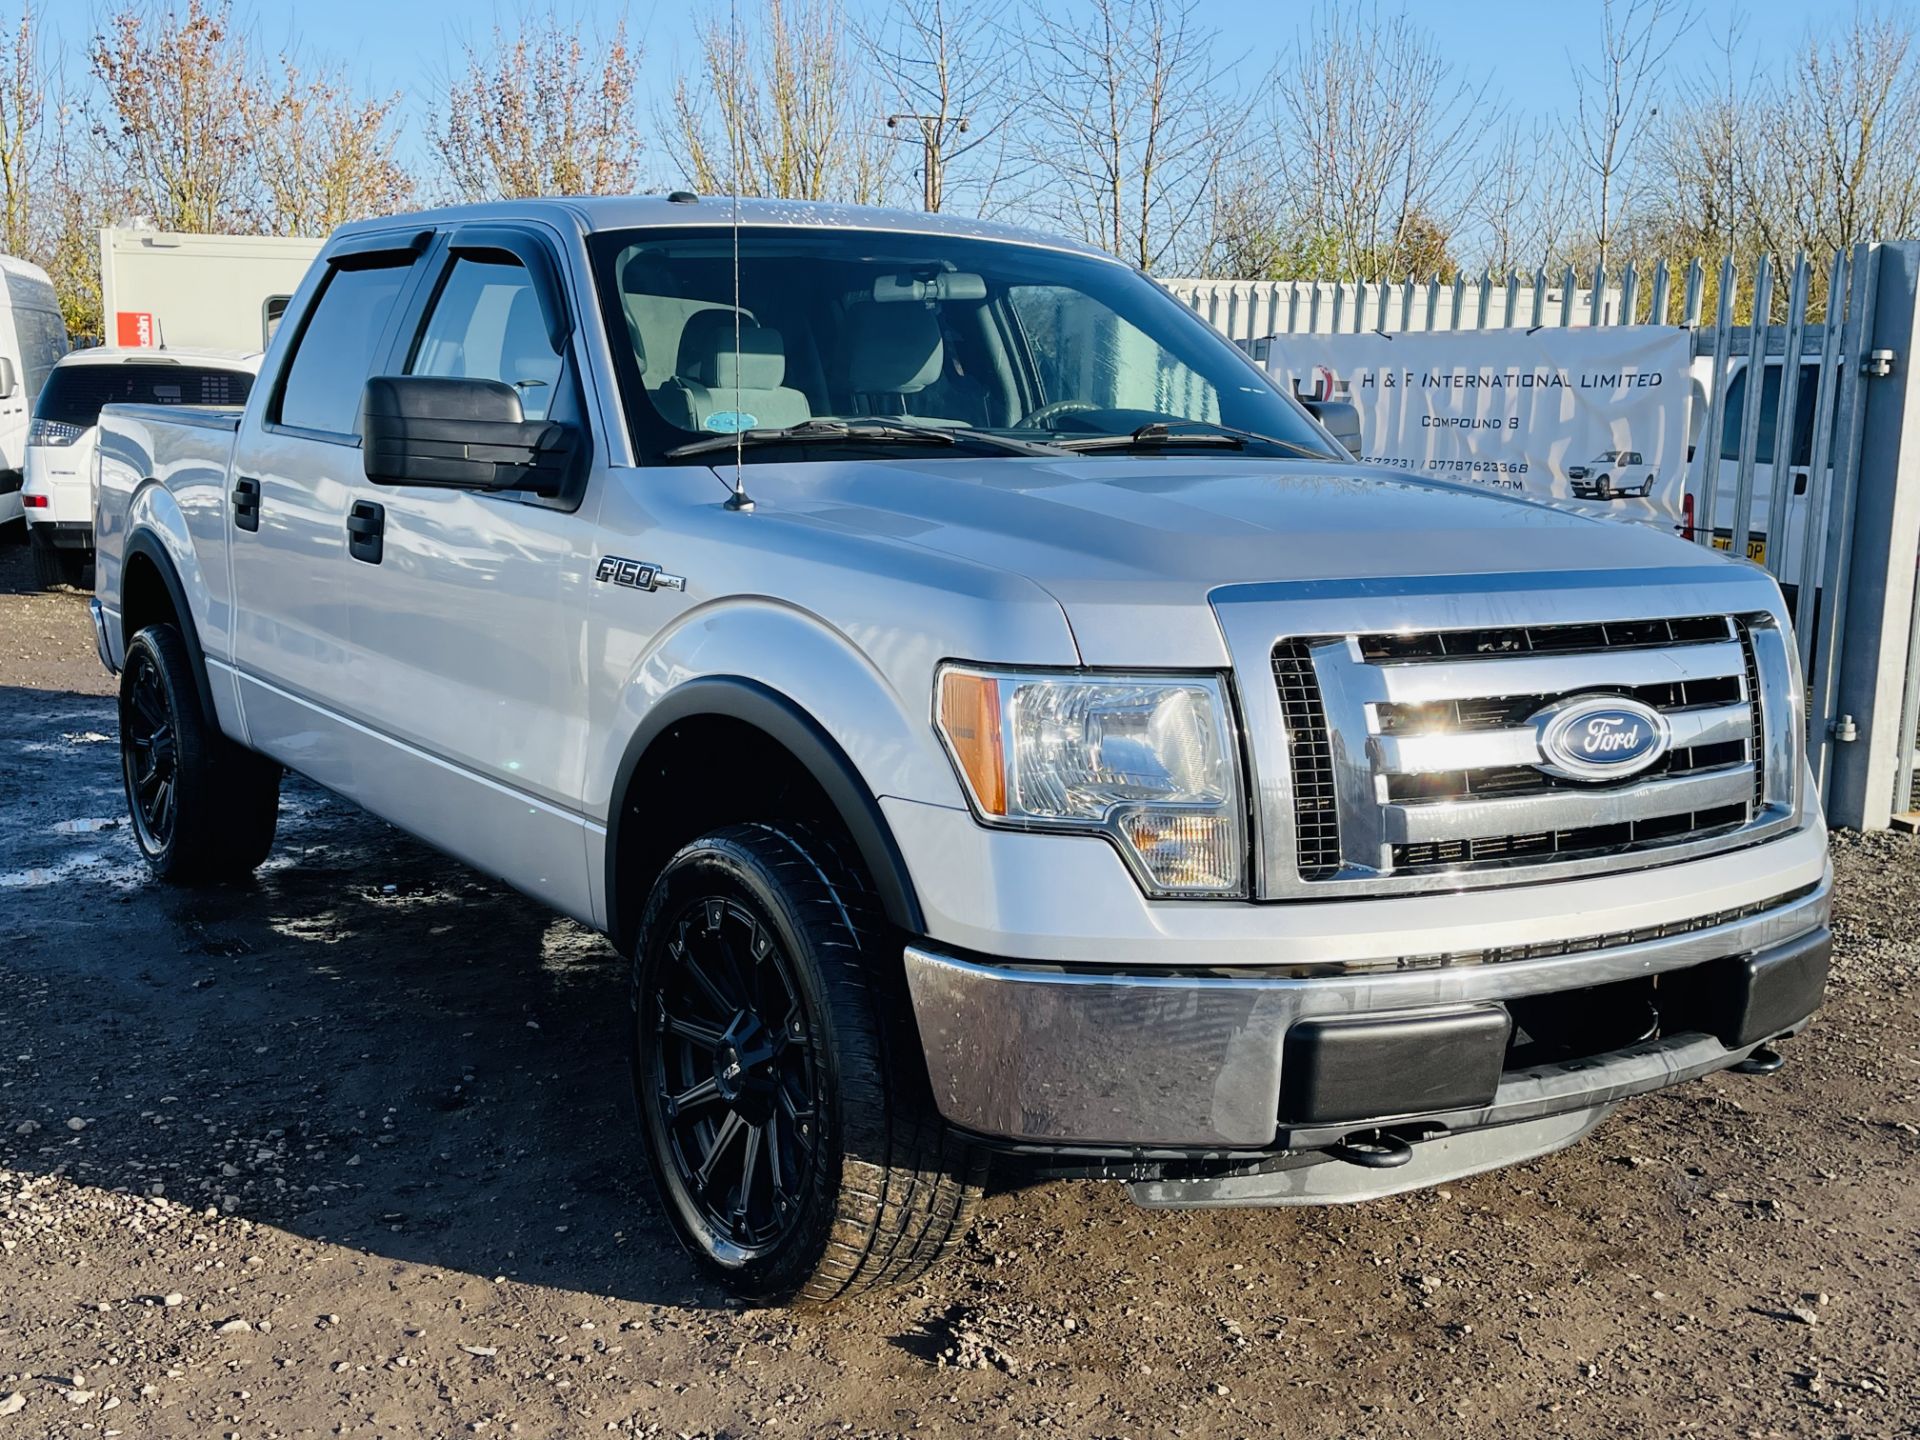 Ford F-150 5.0L V8 XLT Edition 4WD Super-Crew '2011 Year' A/C - Cruise Control - Chrome Pack - Image 2 of 23